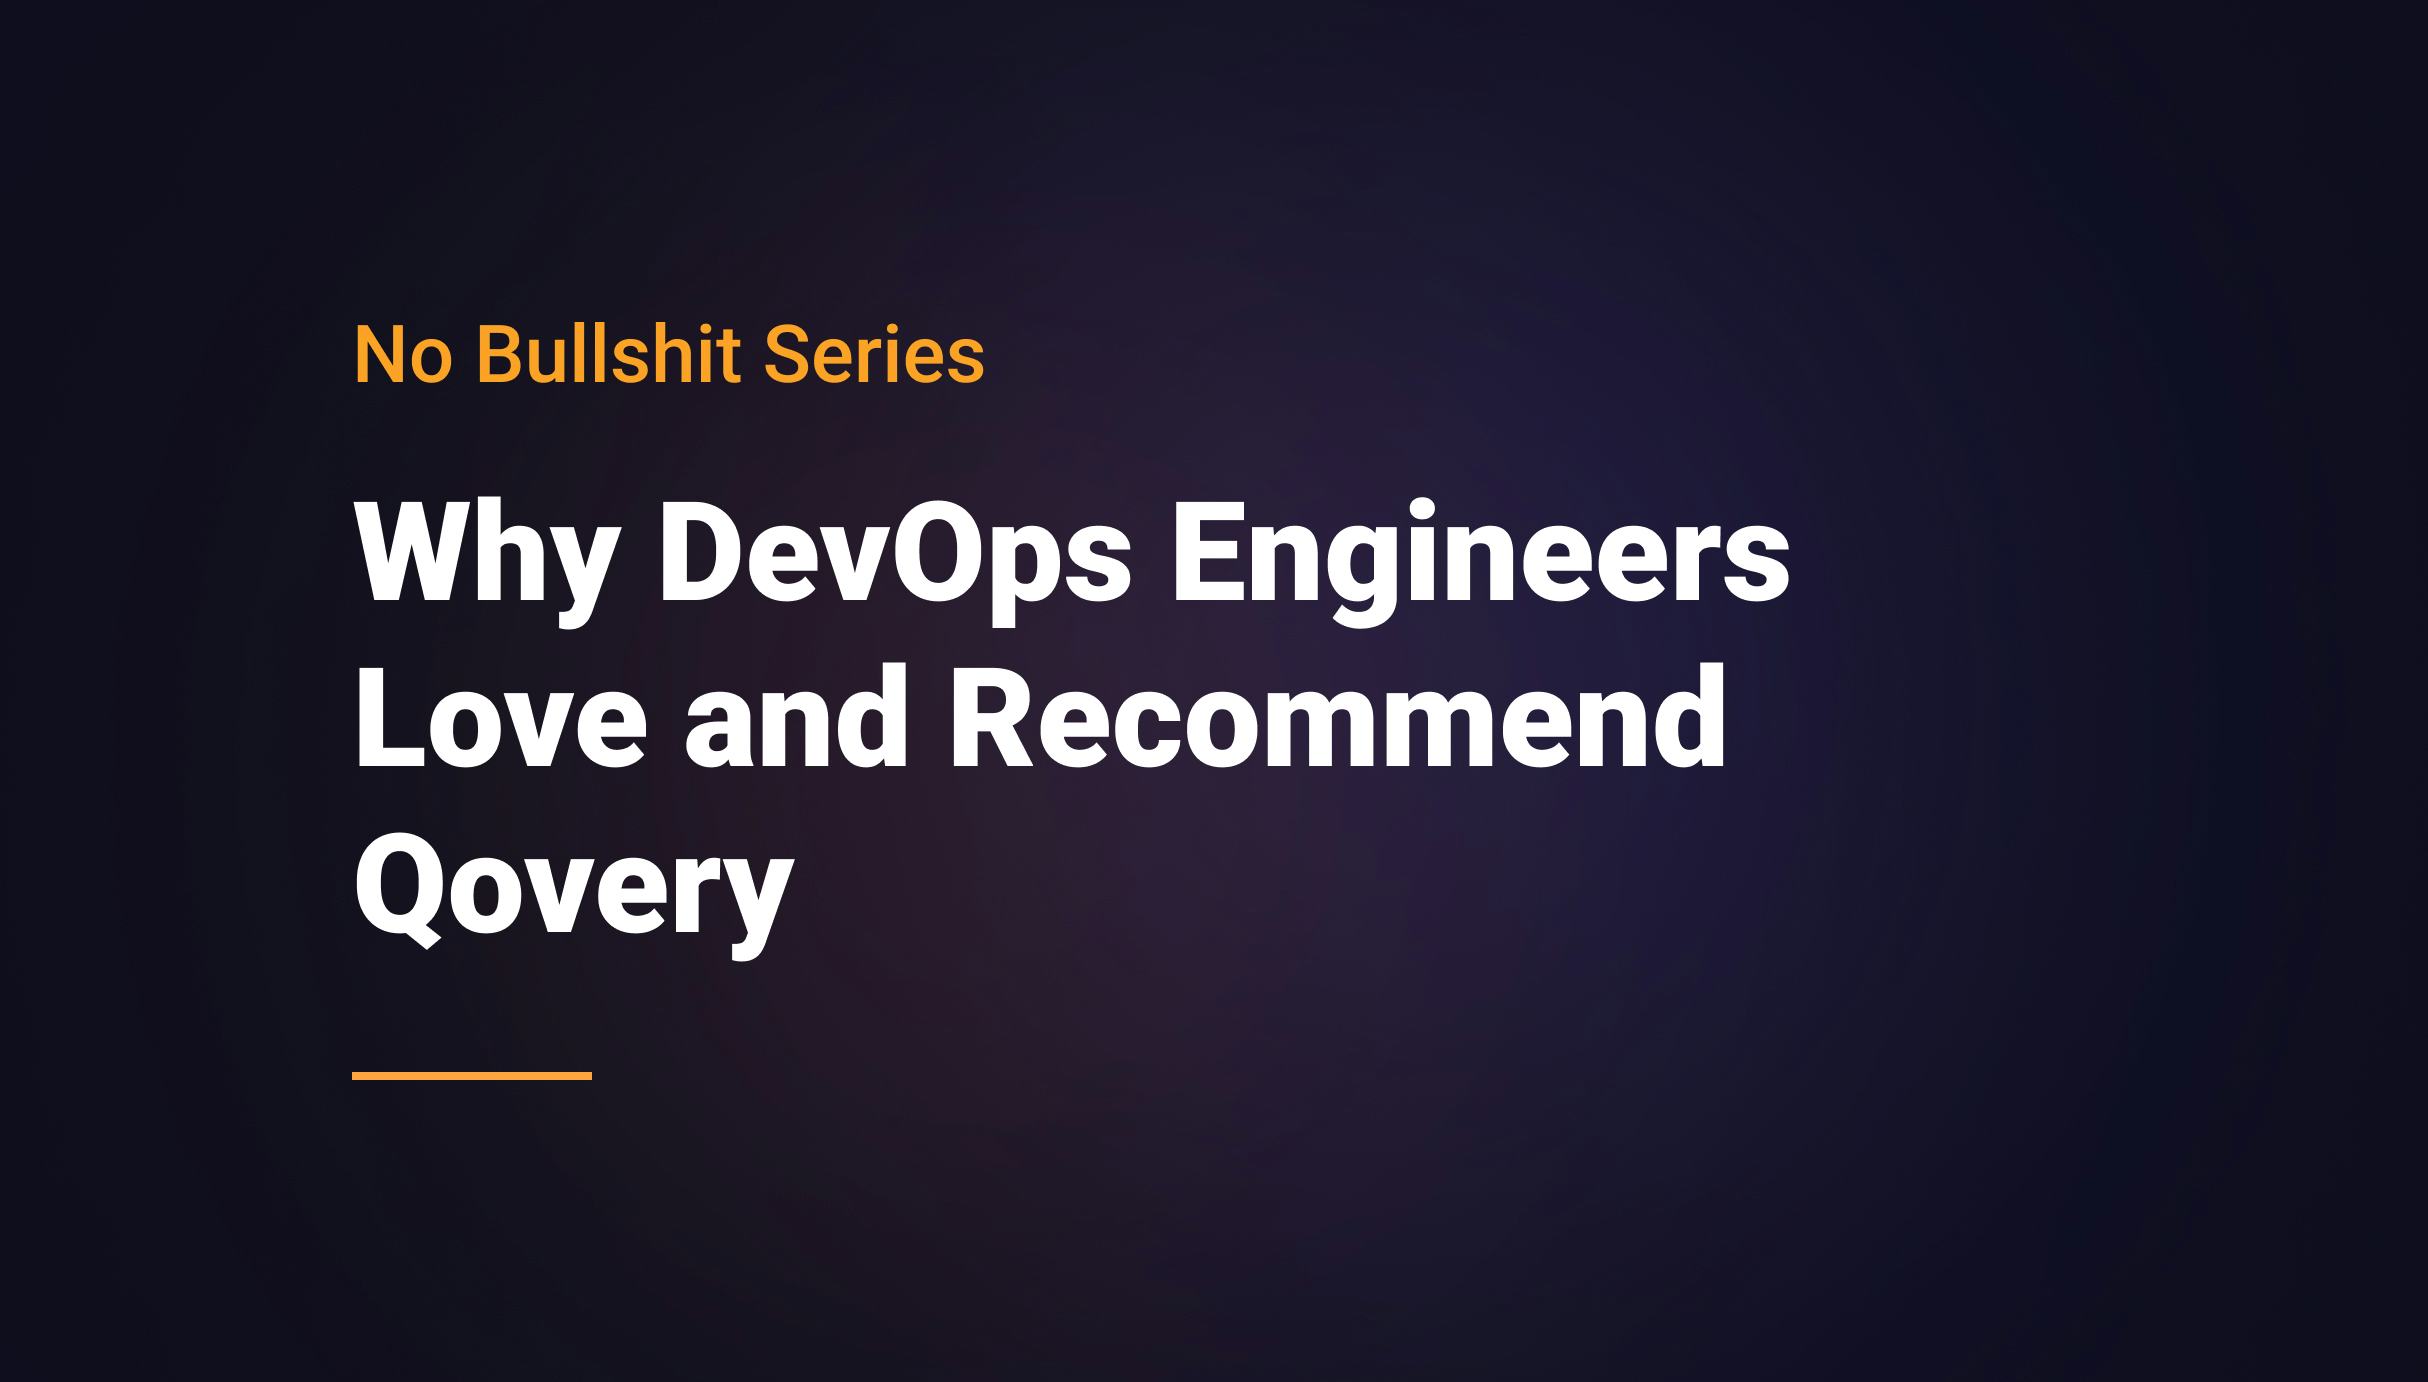 Why DevOps Engineers Love and Recommend Qovery